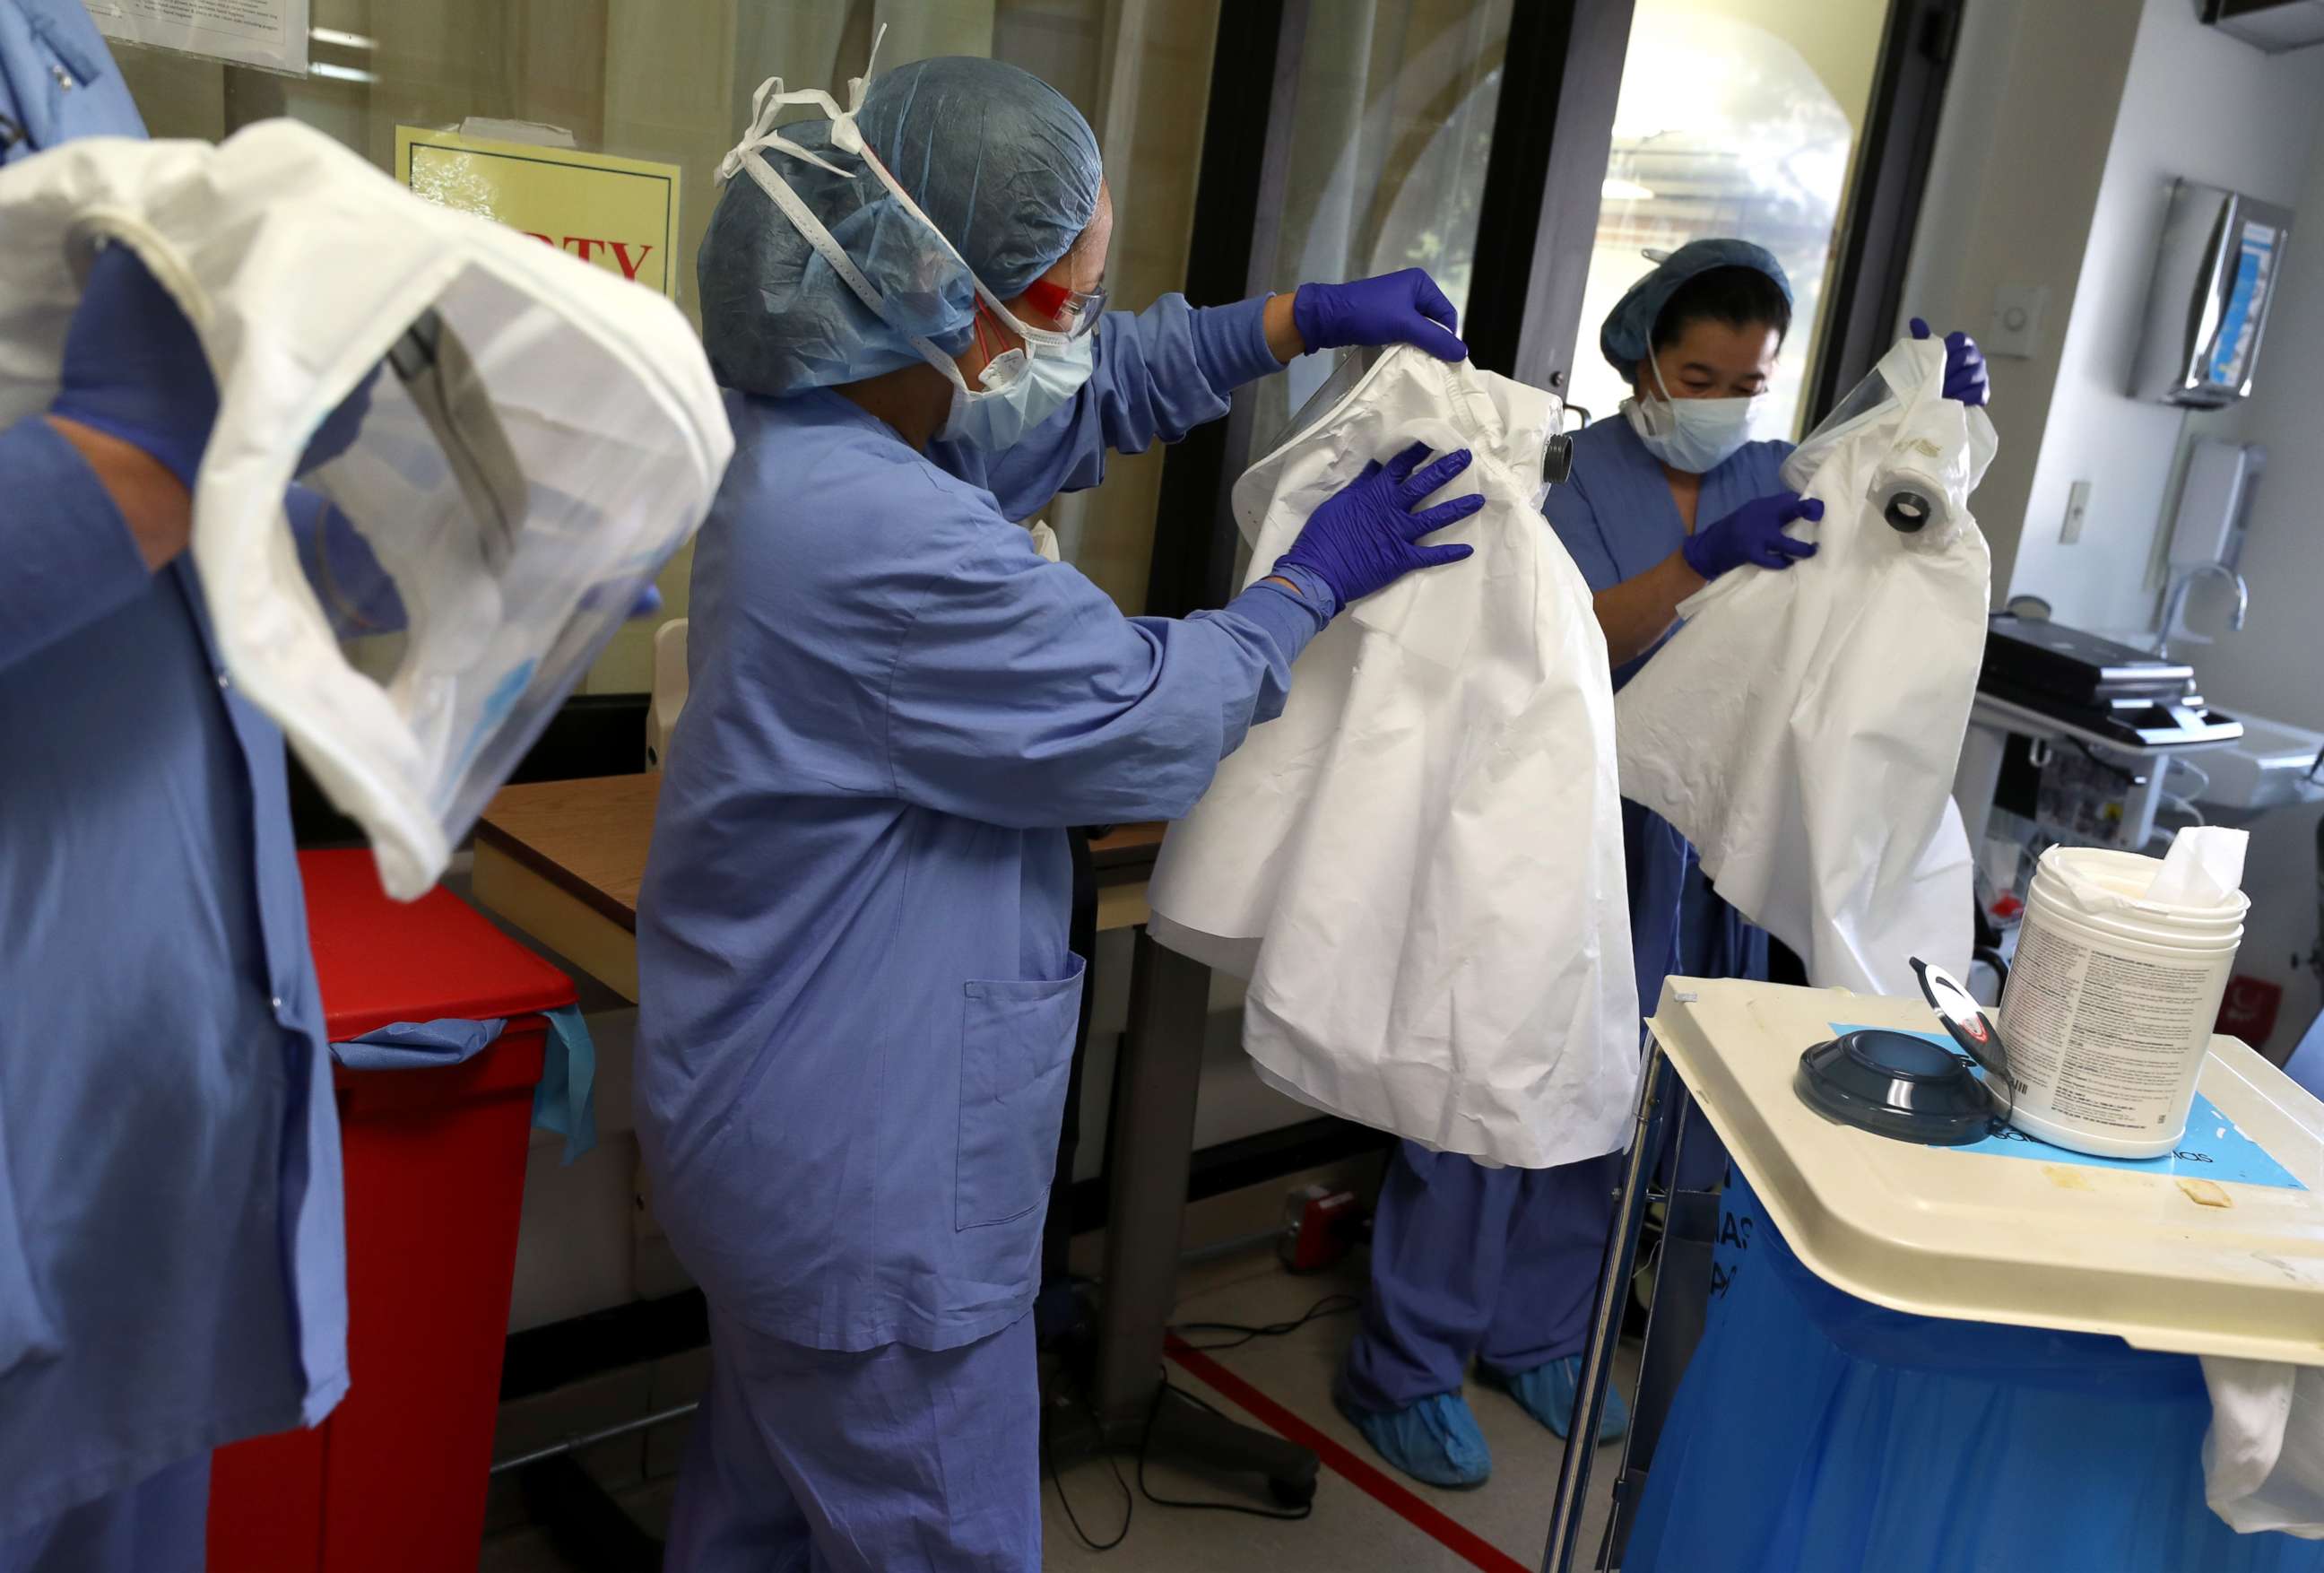 PHOTO: Nurses clean personal protective equipment (PPE) after being part of a team that performed a procedure on a coronavirus COVID-19 patient in the intensive care unit at Regional Medical Center on May 21, 2020 in San Jose, California. 